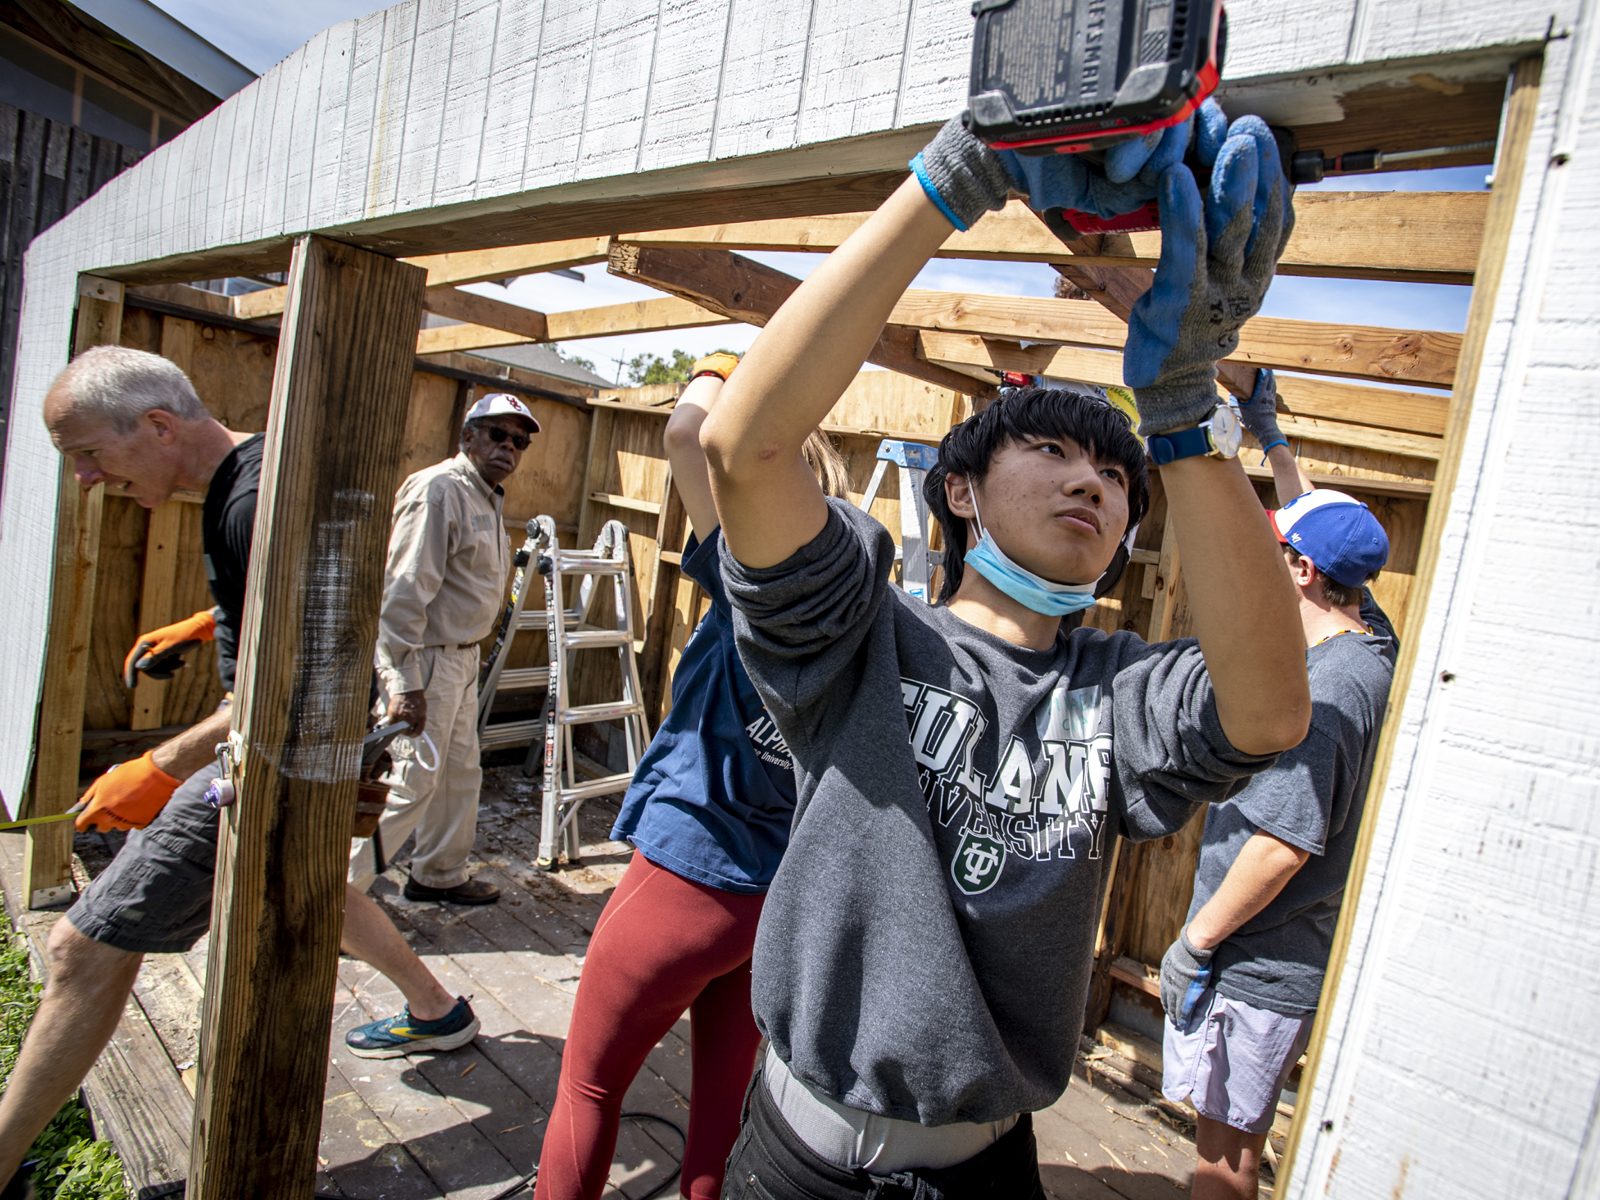 Tulane junior Michael Xu helps secure an aging shed at Hagar’s House NOLA which provides transitional housing and resources for women and children.